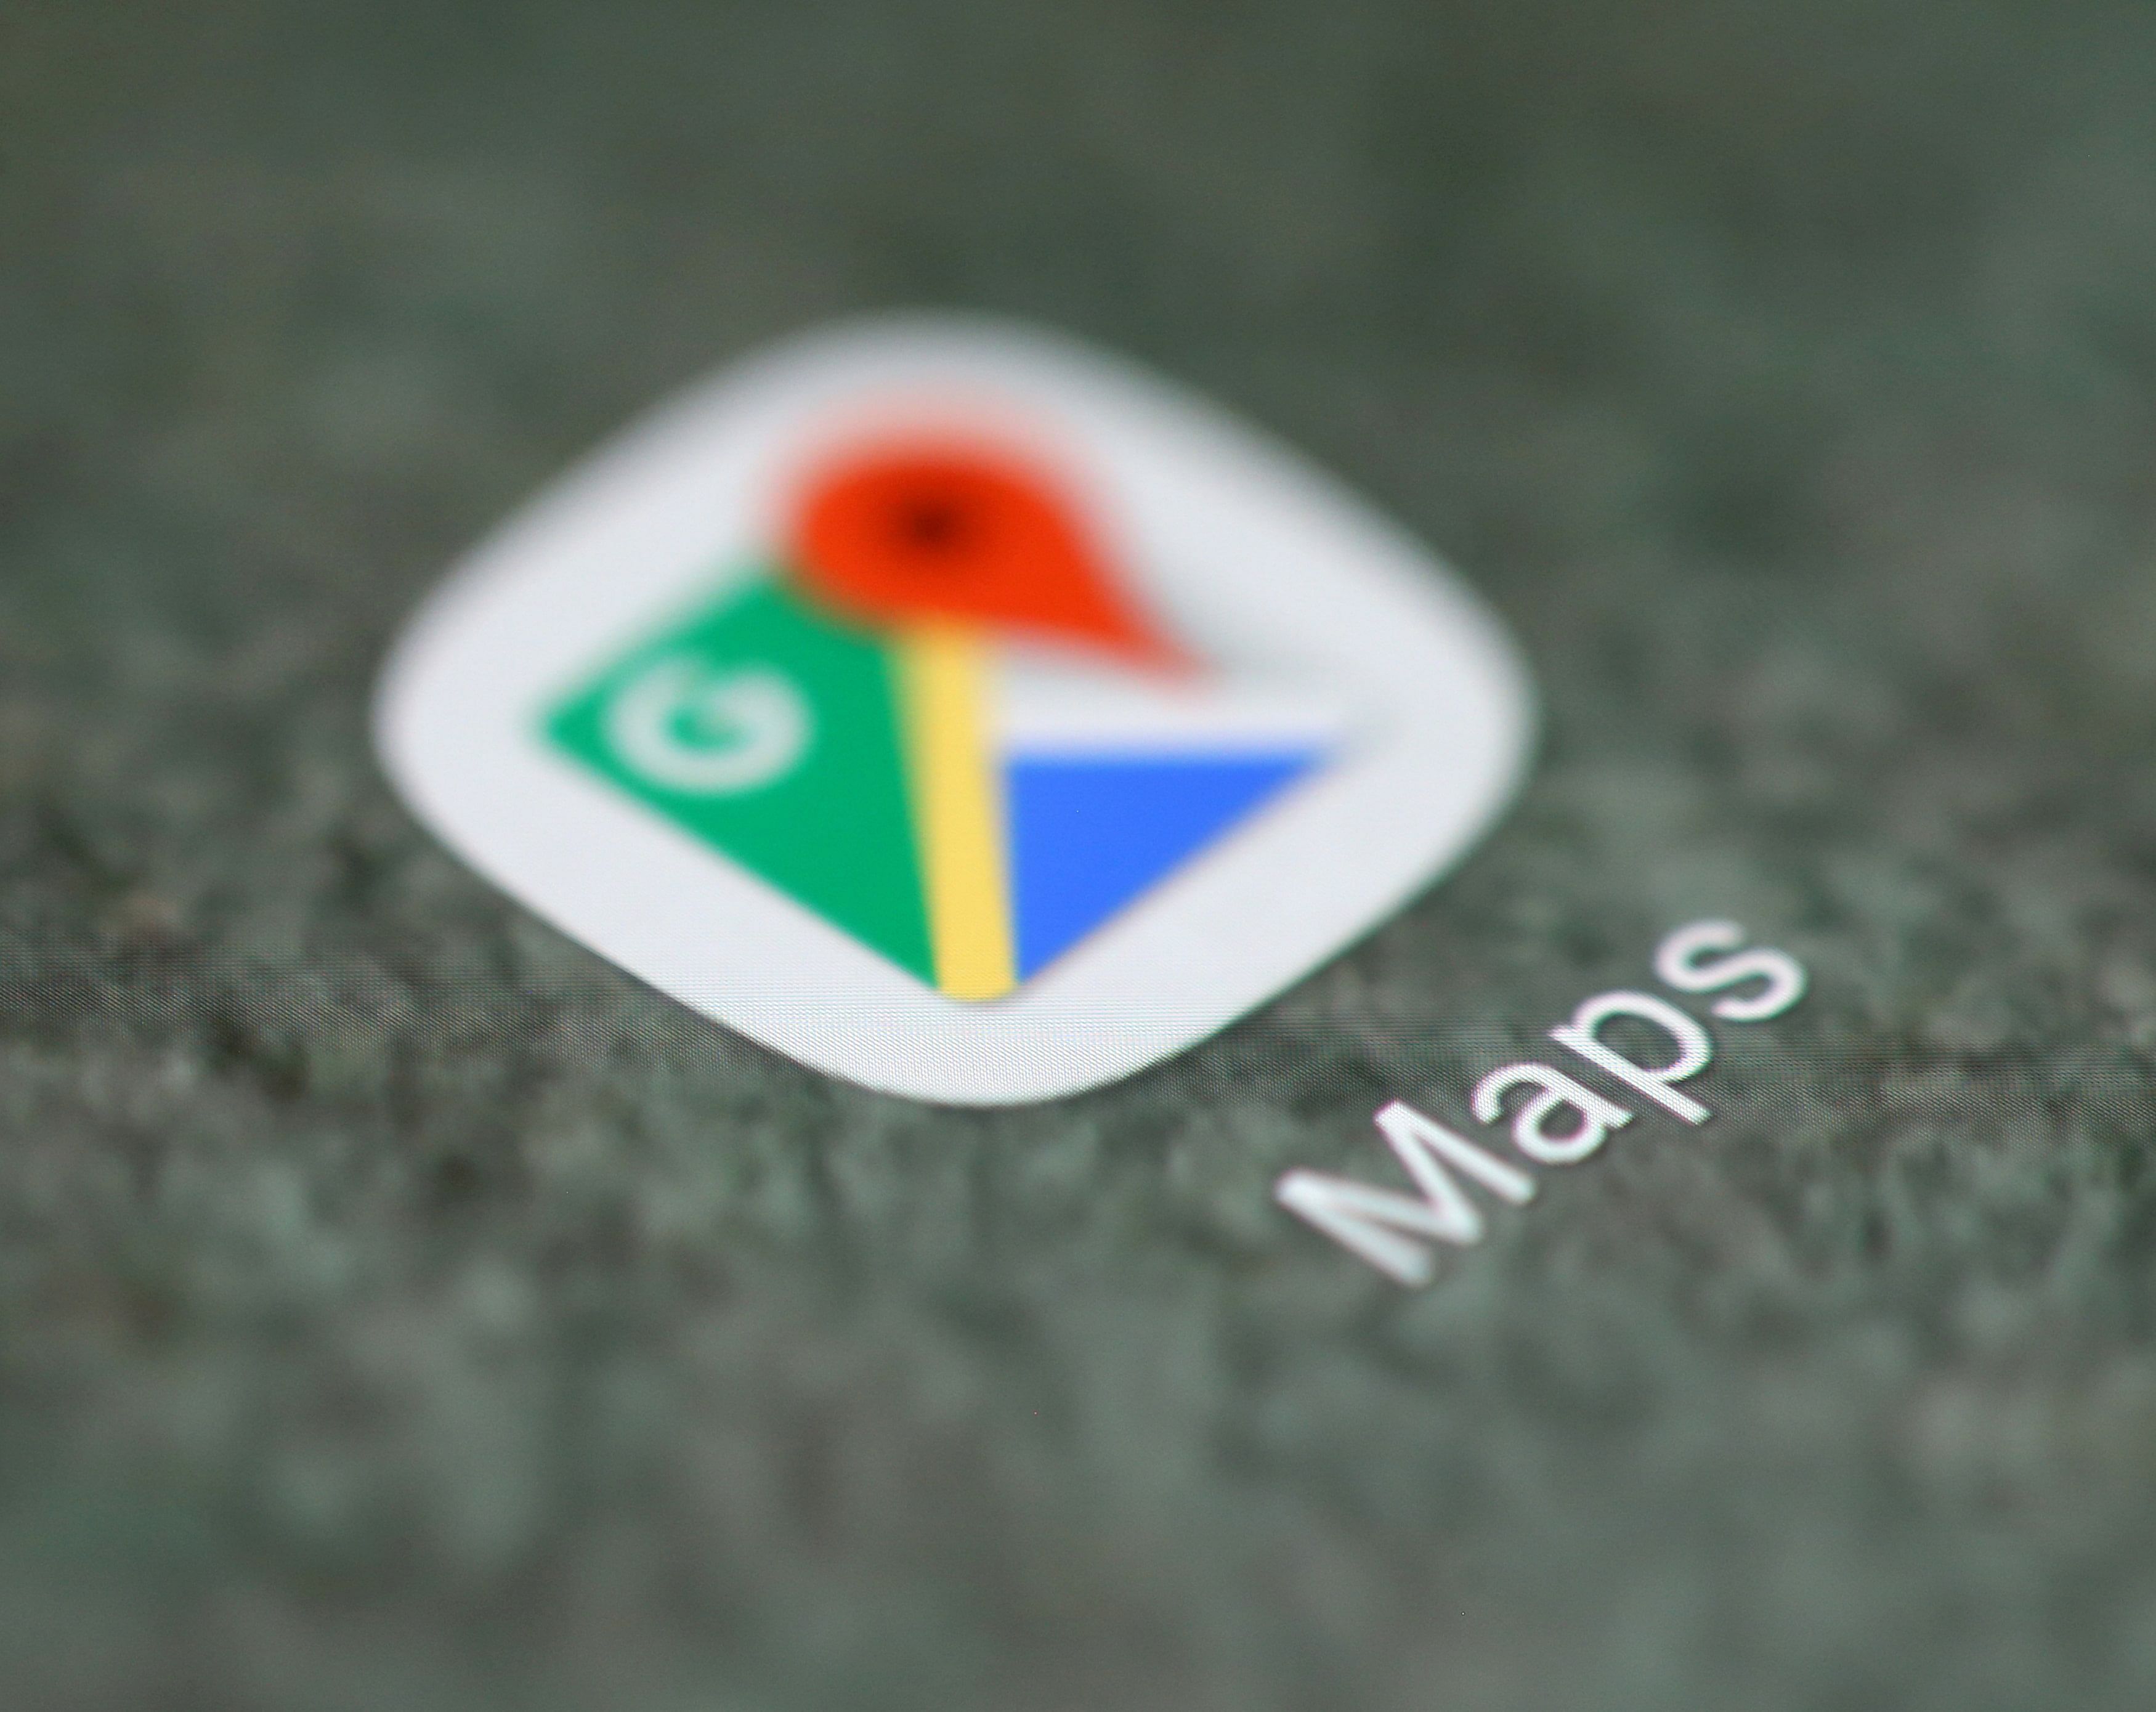 Google has invested billions of dollars from its search ads business to digitally map the world, drawing 1 billion users on average every month to its free navigation app. Credit: Reuters Photo